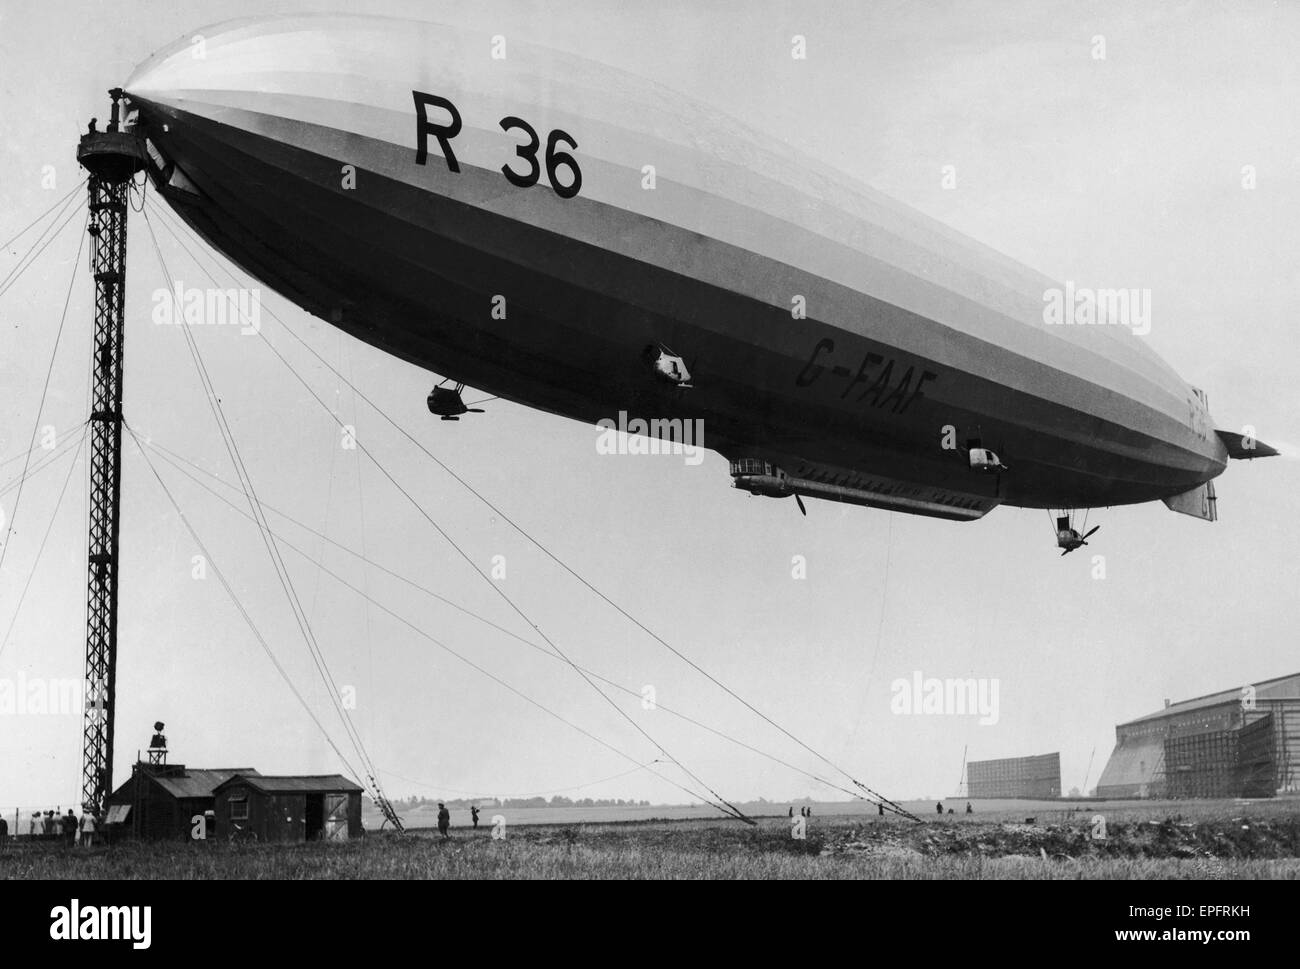 Members of Parliament visit the Airship R36 at Pulham . Passengers board the airship by climbing the stairs in the mooring mast. 19th June 1921 Stock Photo